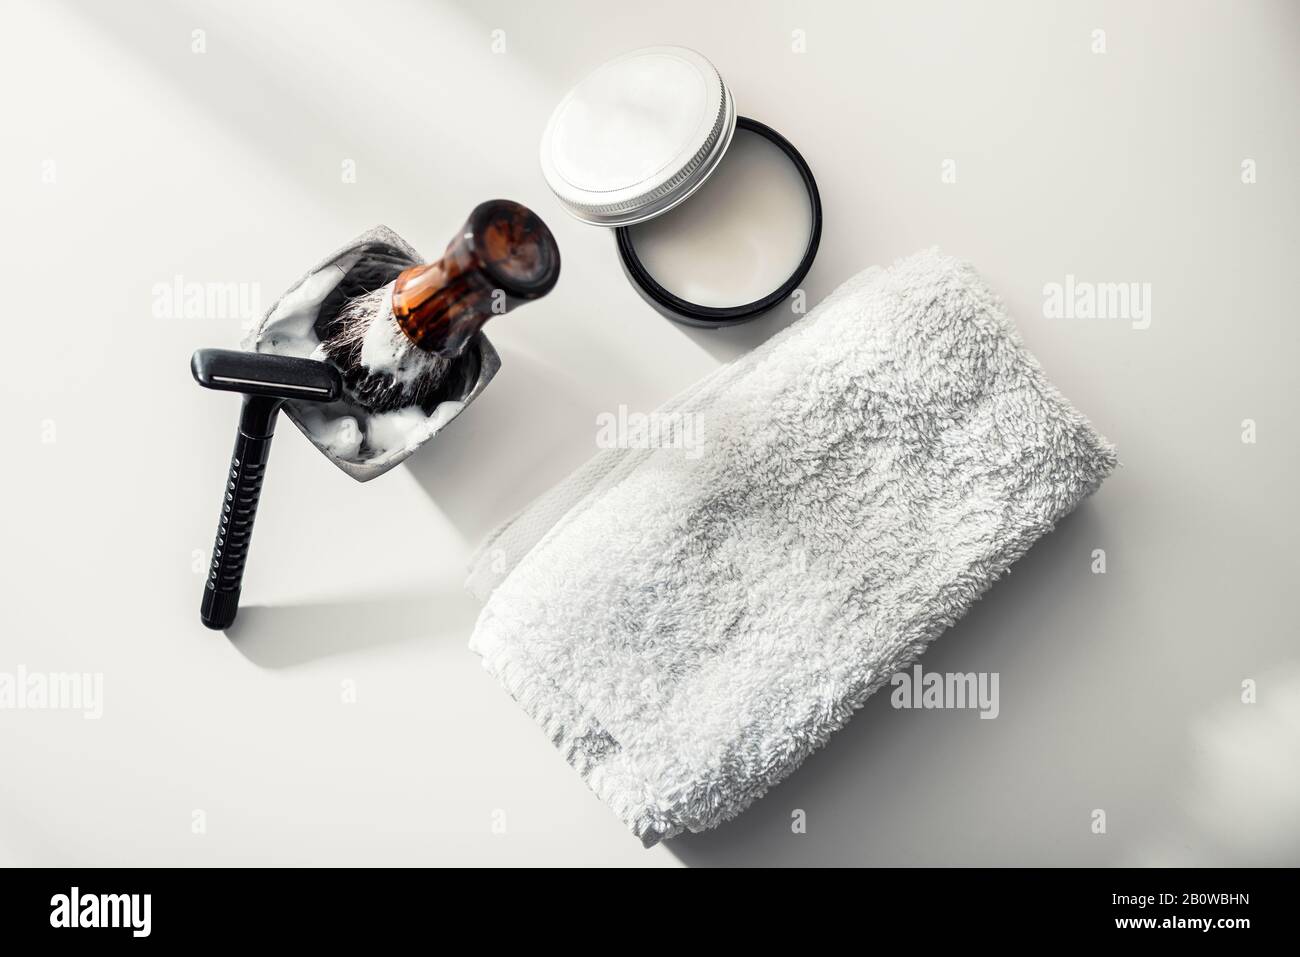 Man care accessory for shaving and grooming on a clean white background, flat lay, top view Stock Photo